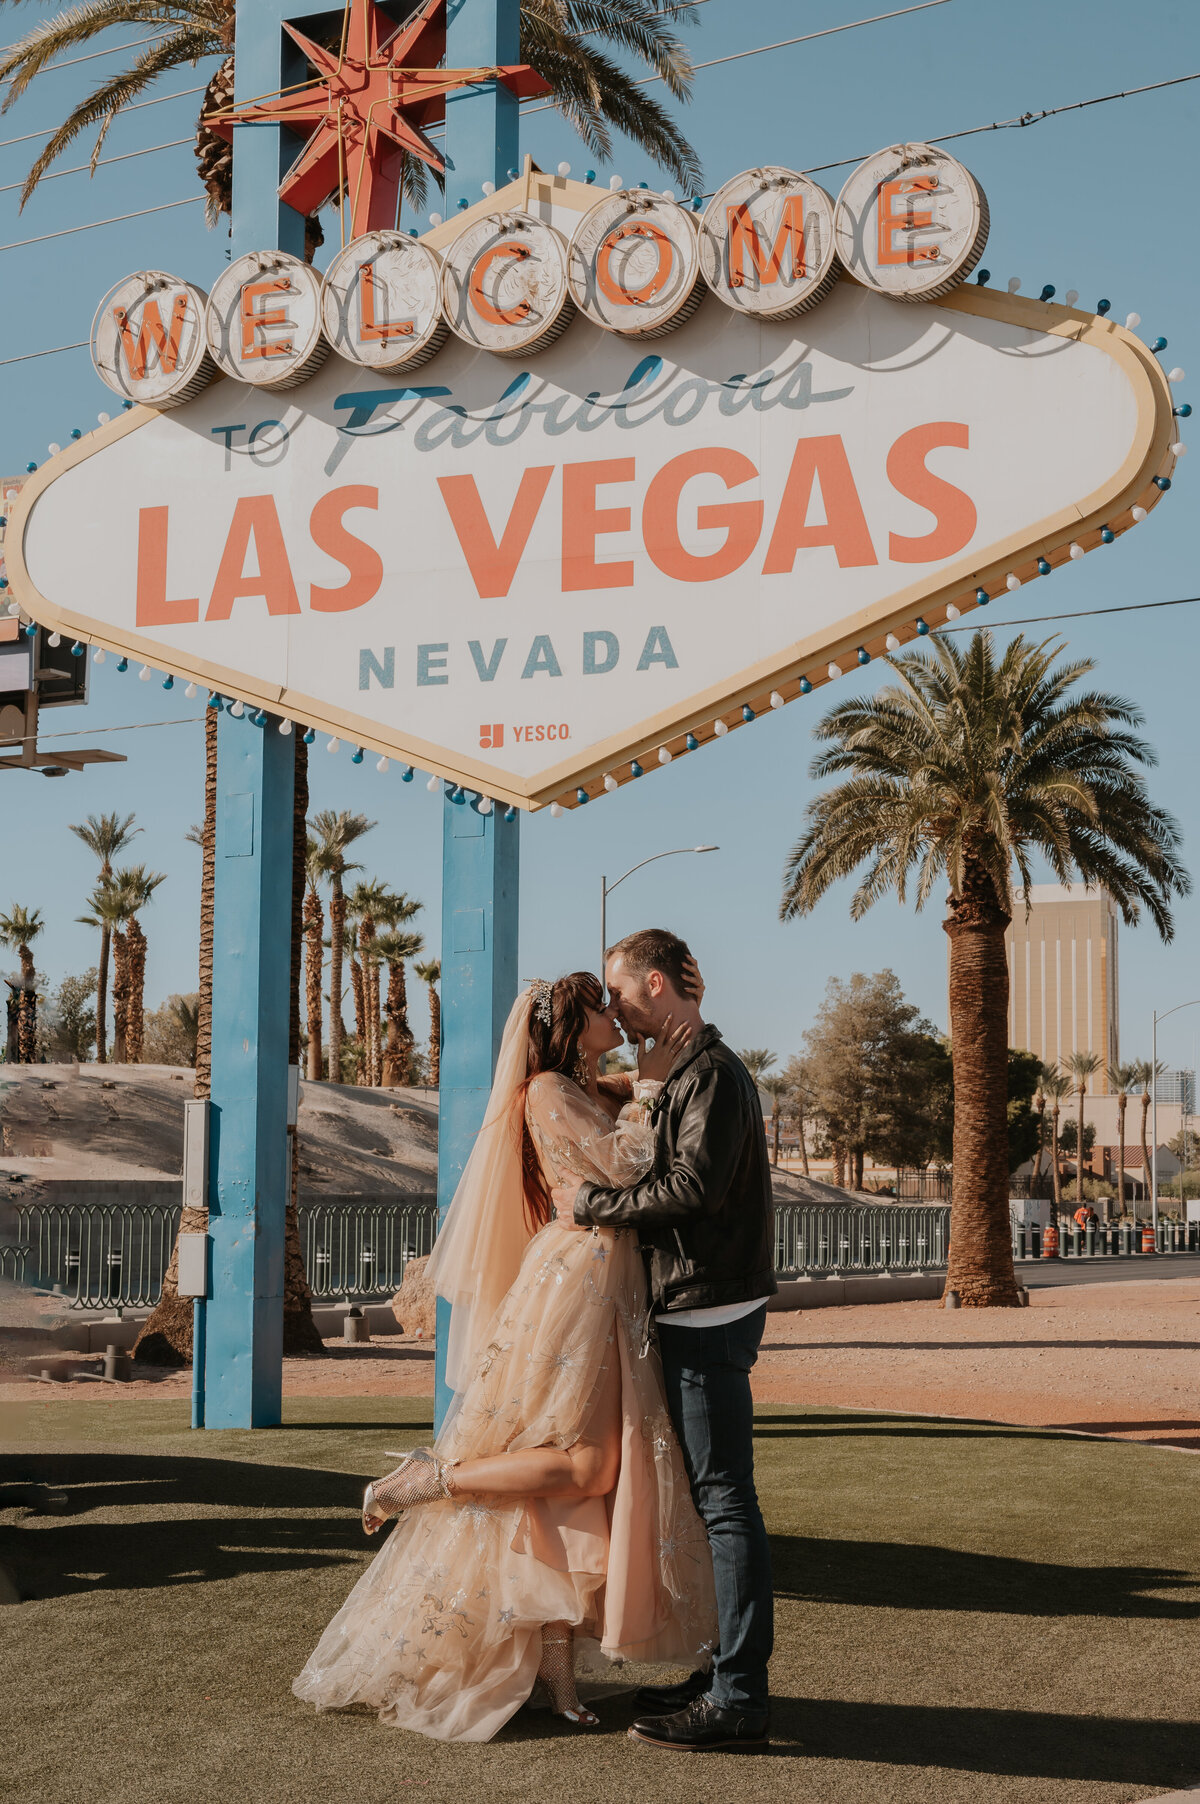 a couple kisses in front of the famous welcome to las vegas sign